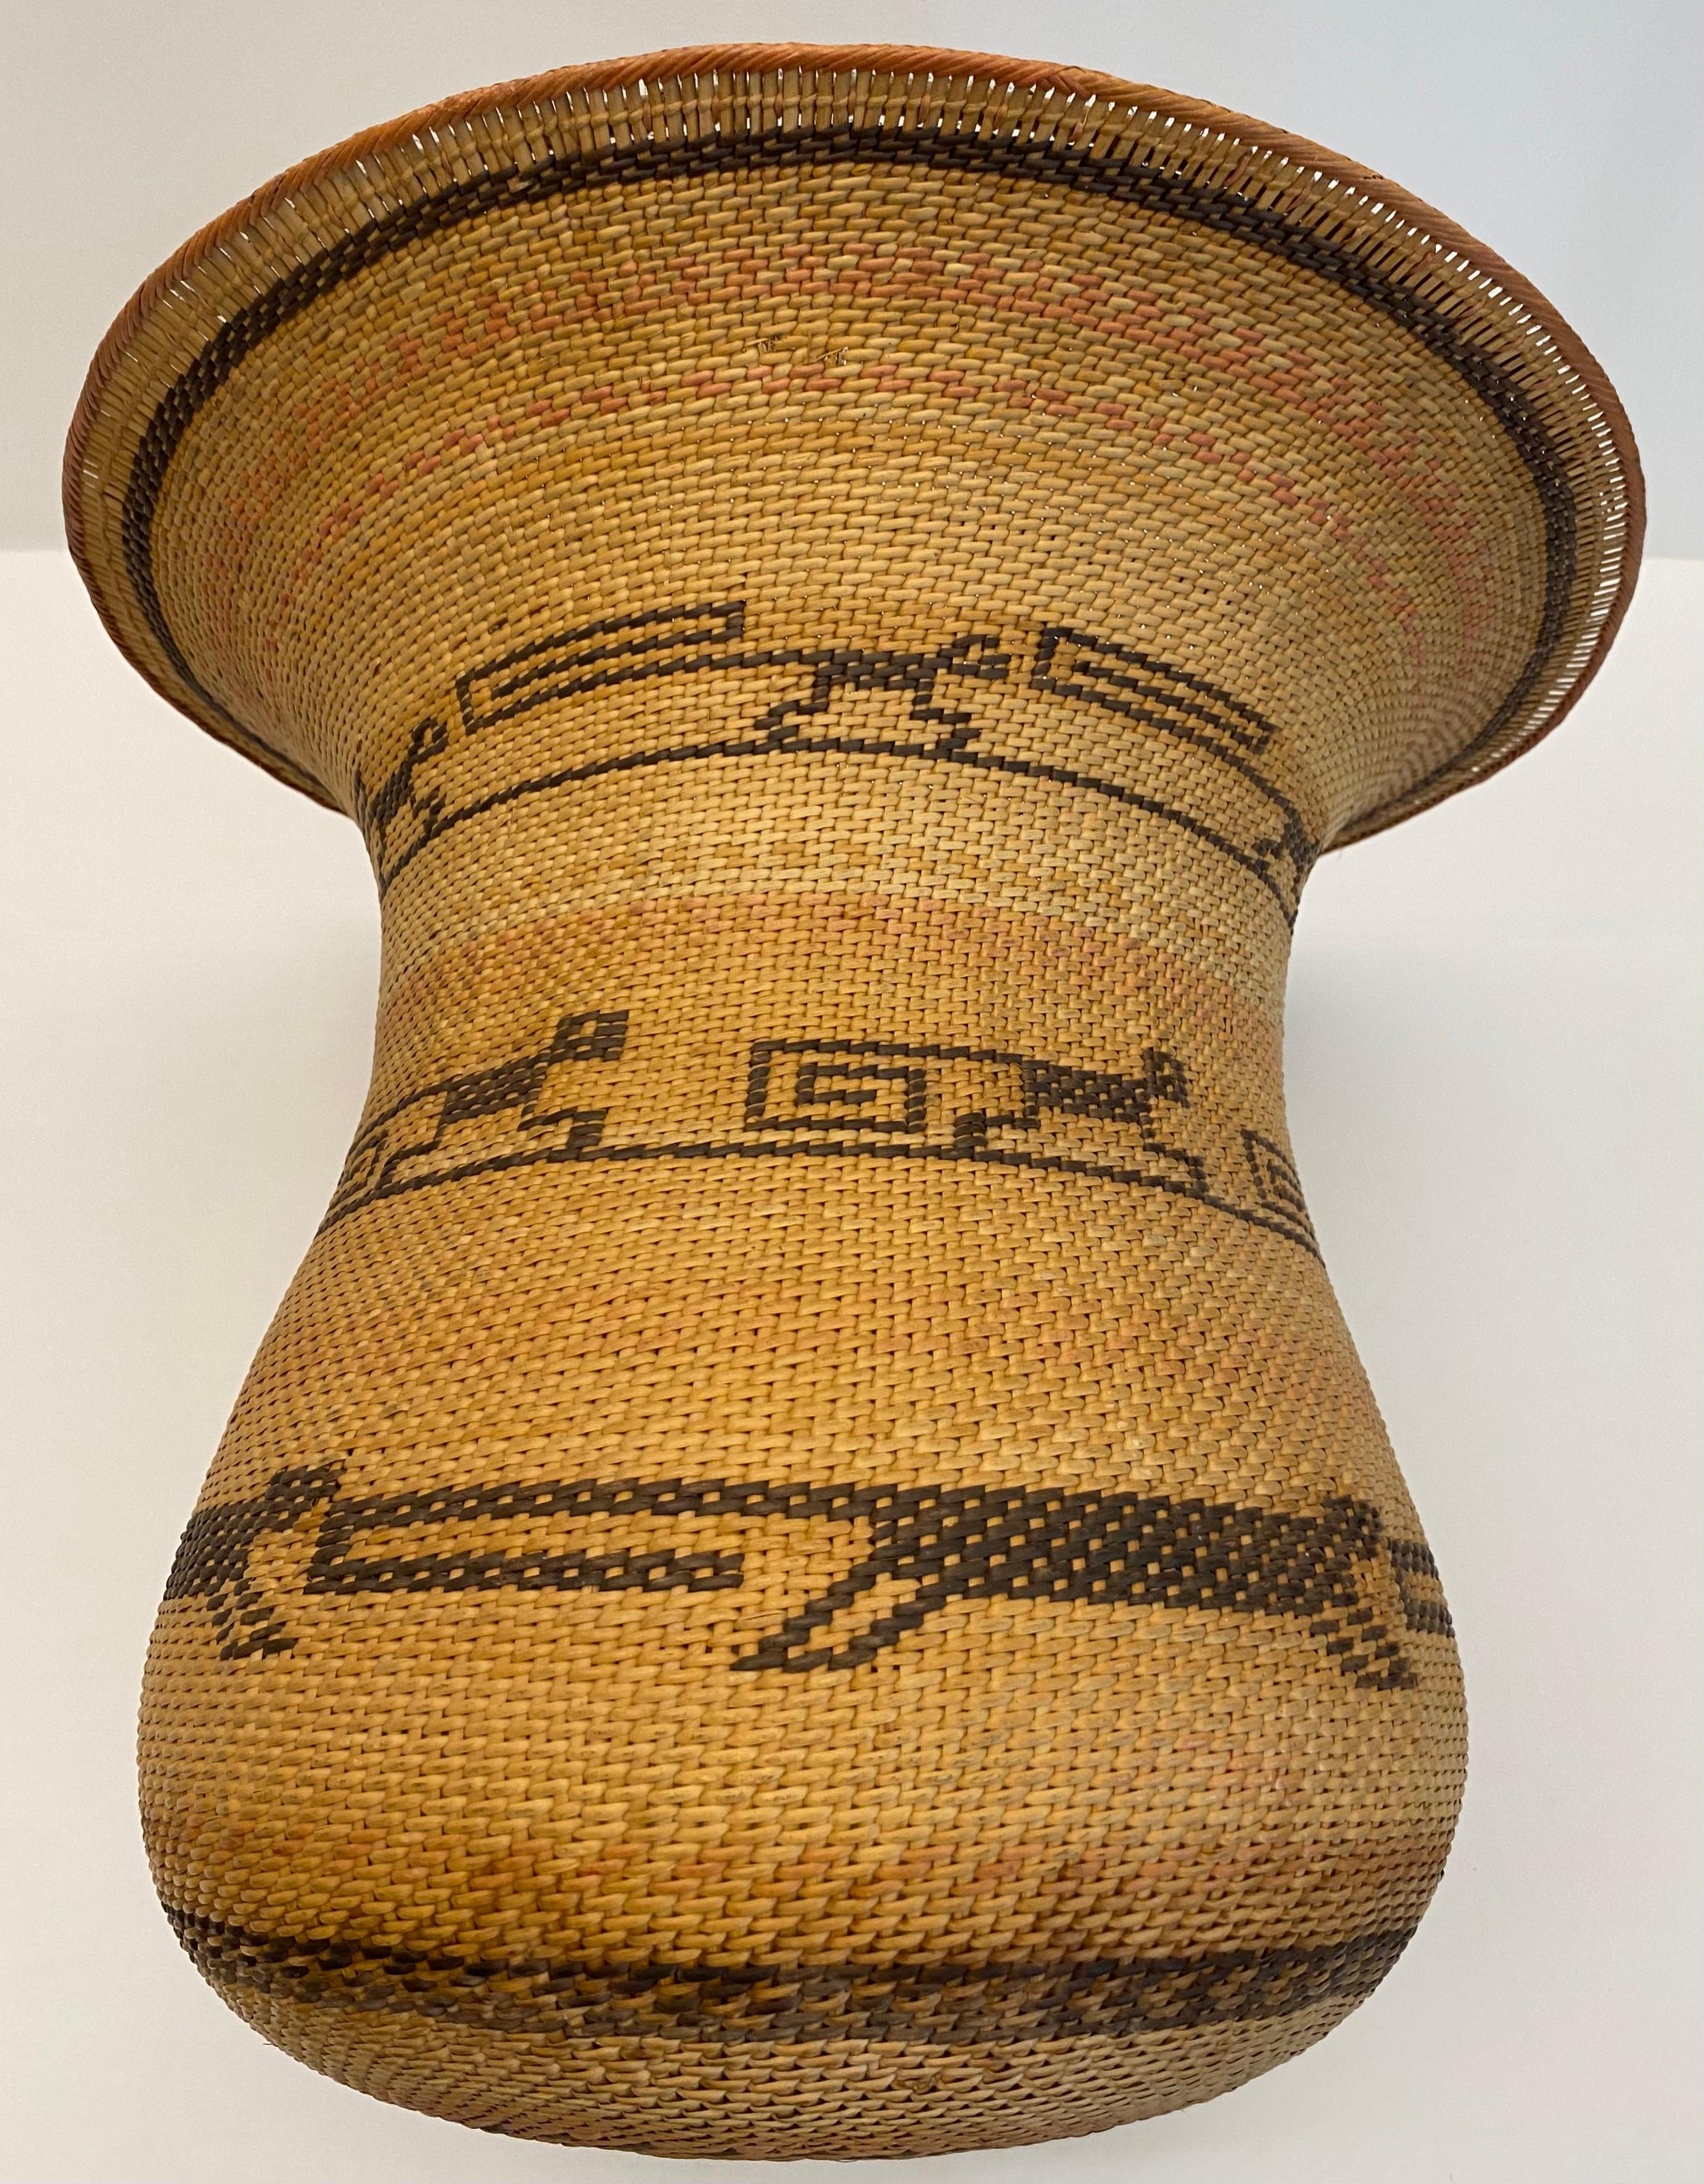 Hand Woven Basket by the Tribal People of the Amazon  1